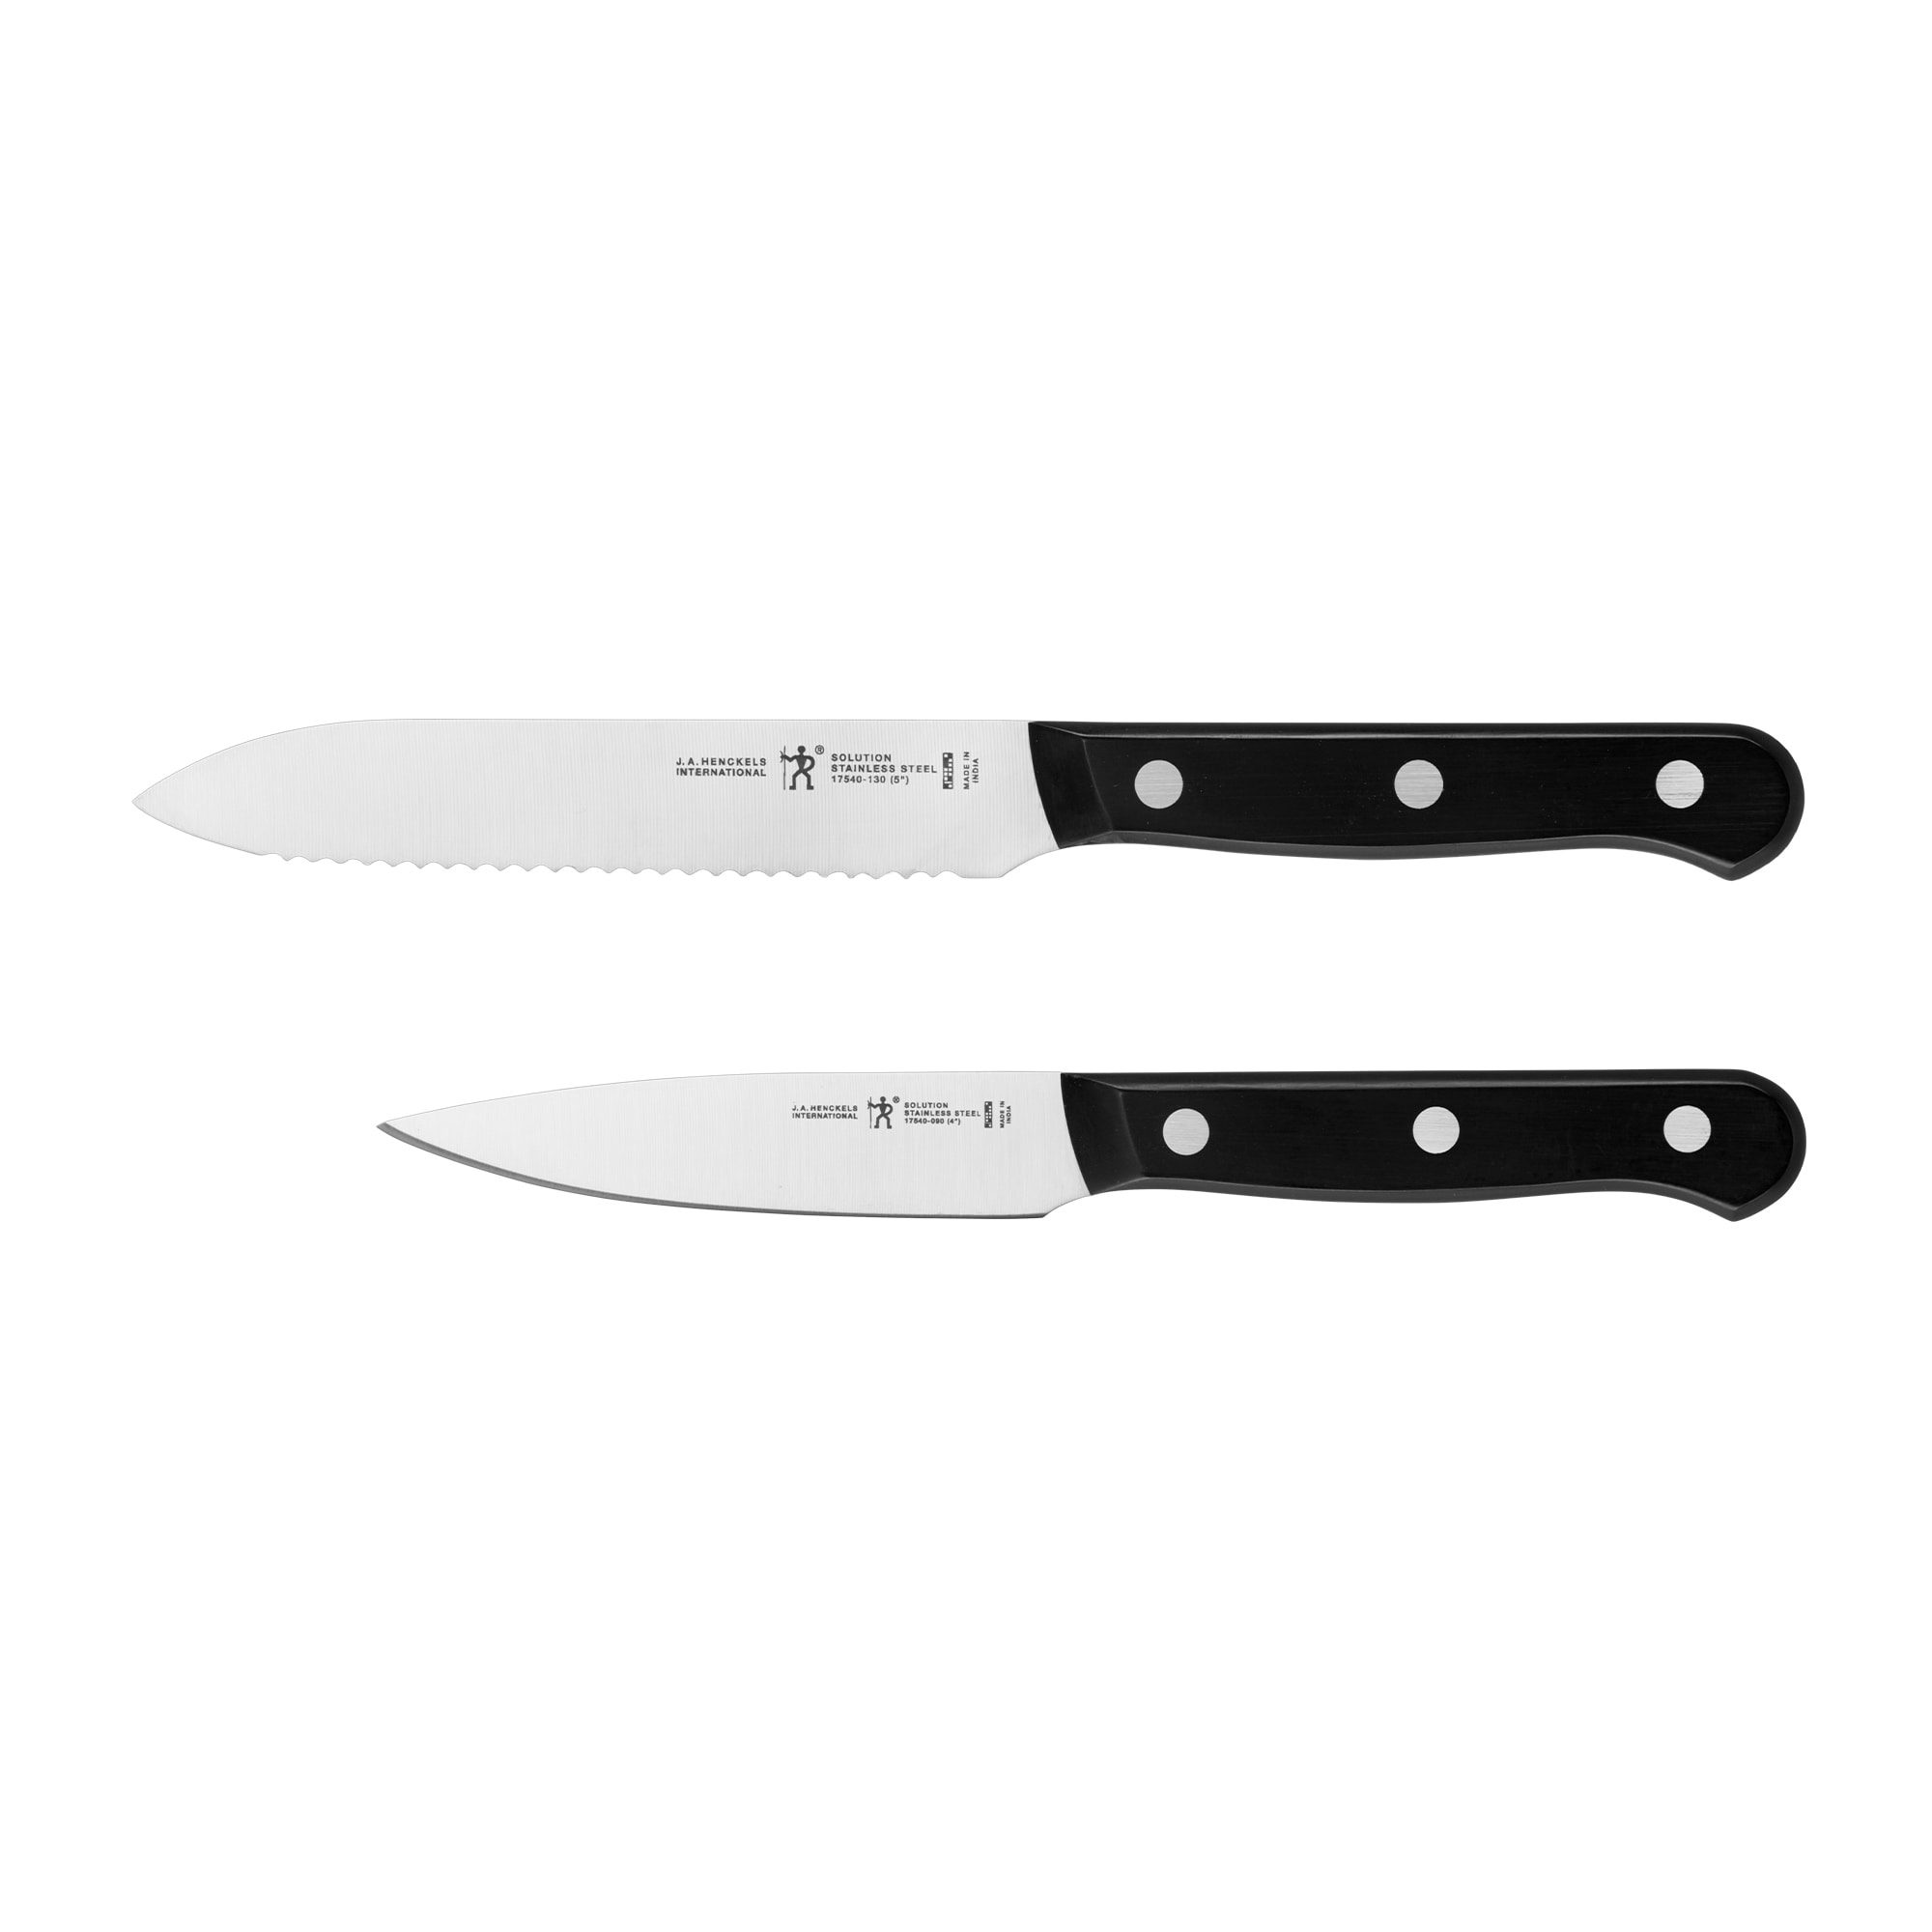 Henckels Forged Accent 6-pc, Travel Knife Set